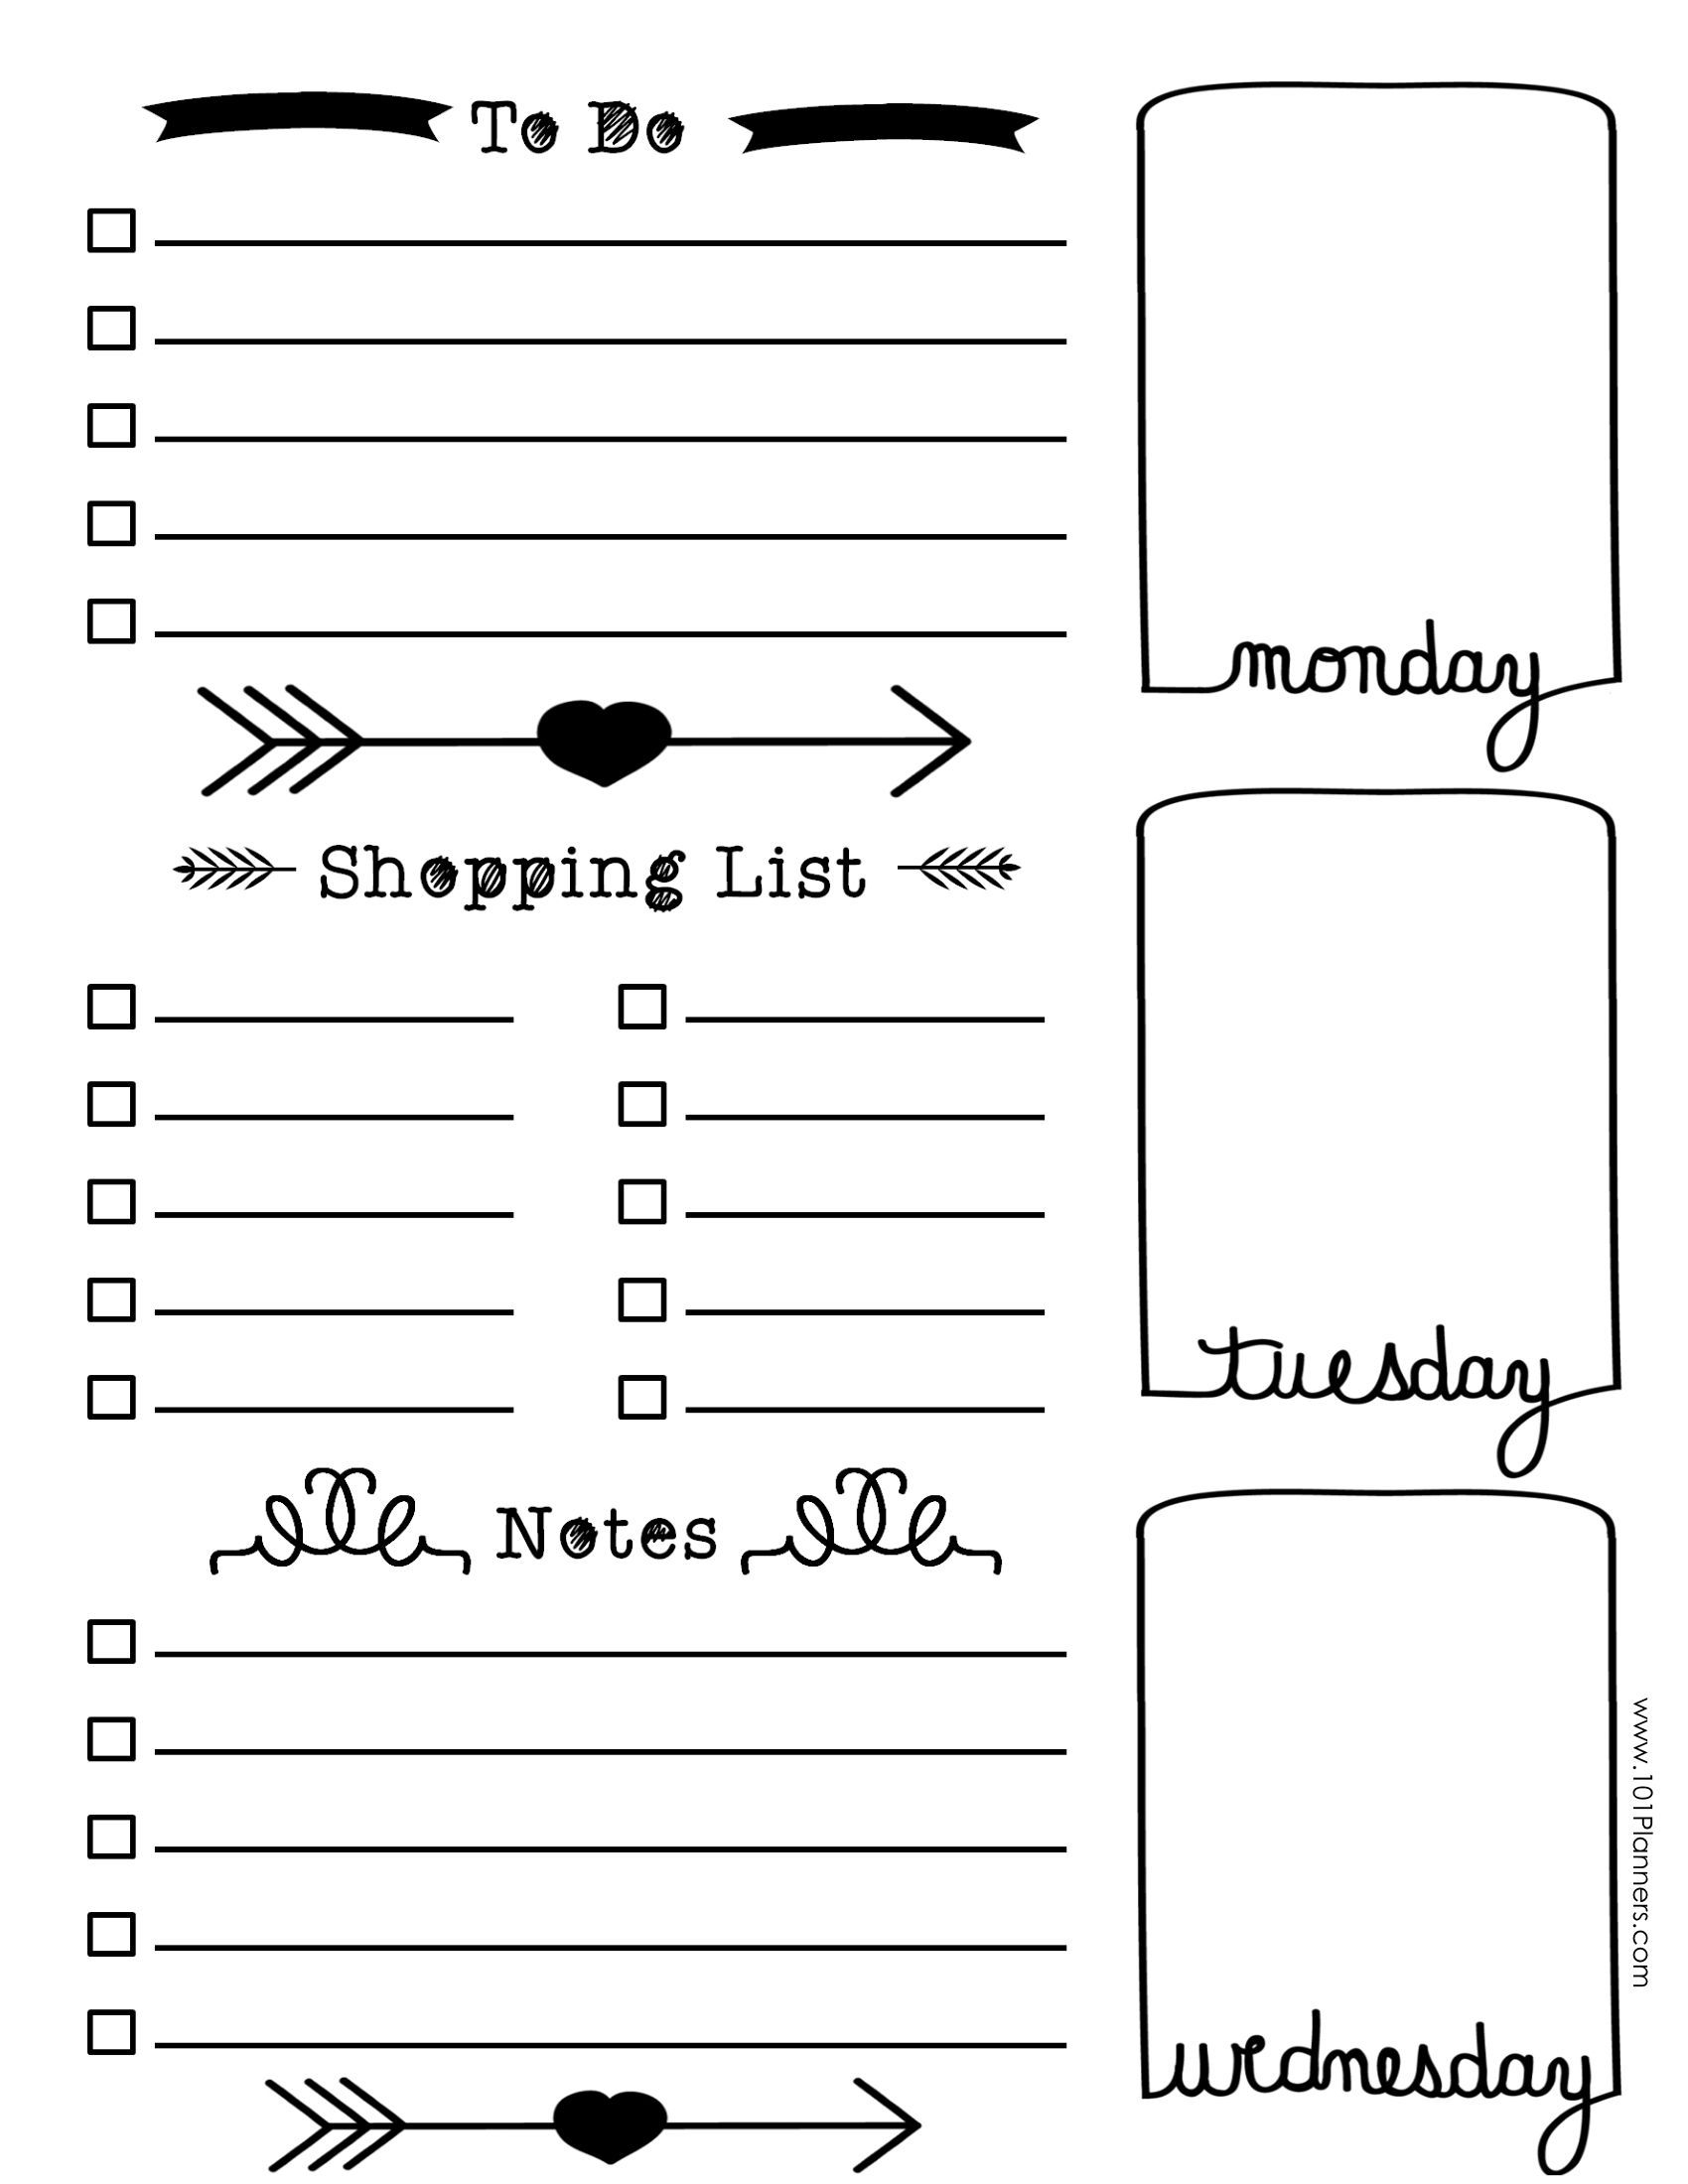 www 101planners wp content uploads 2016 09 bullet journal 10